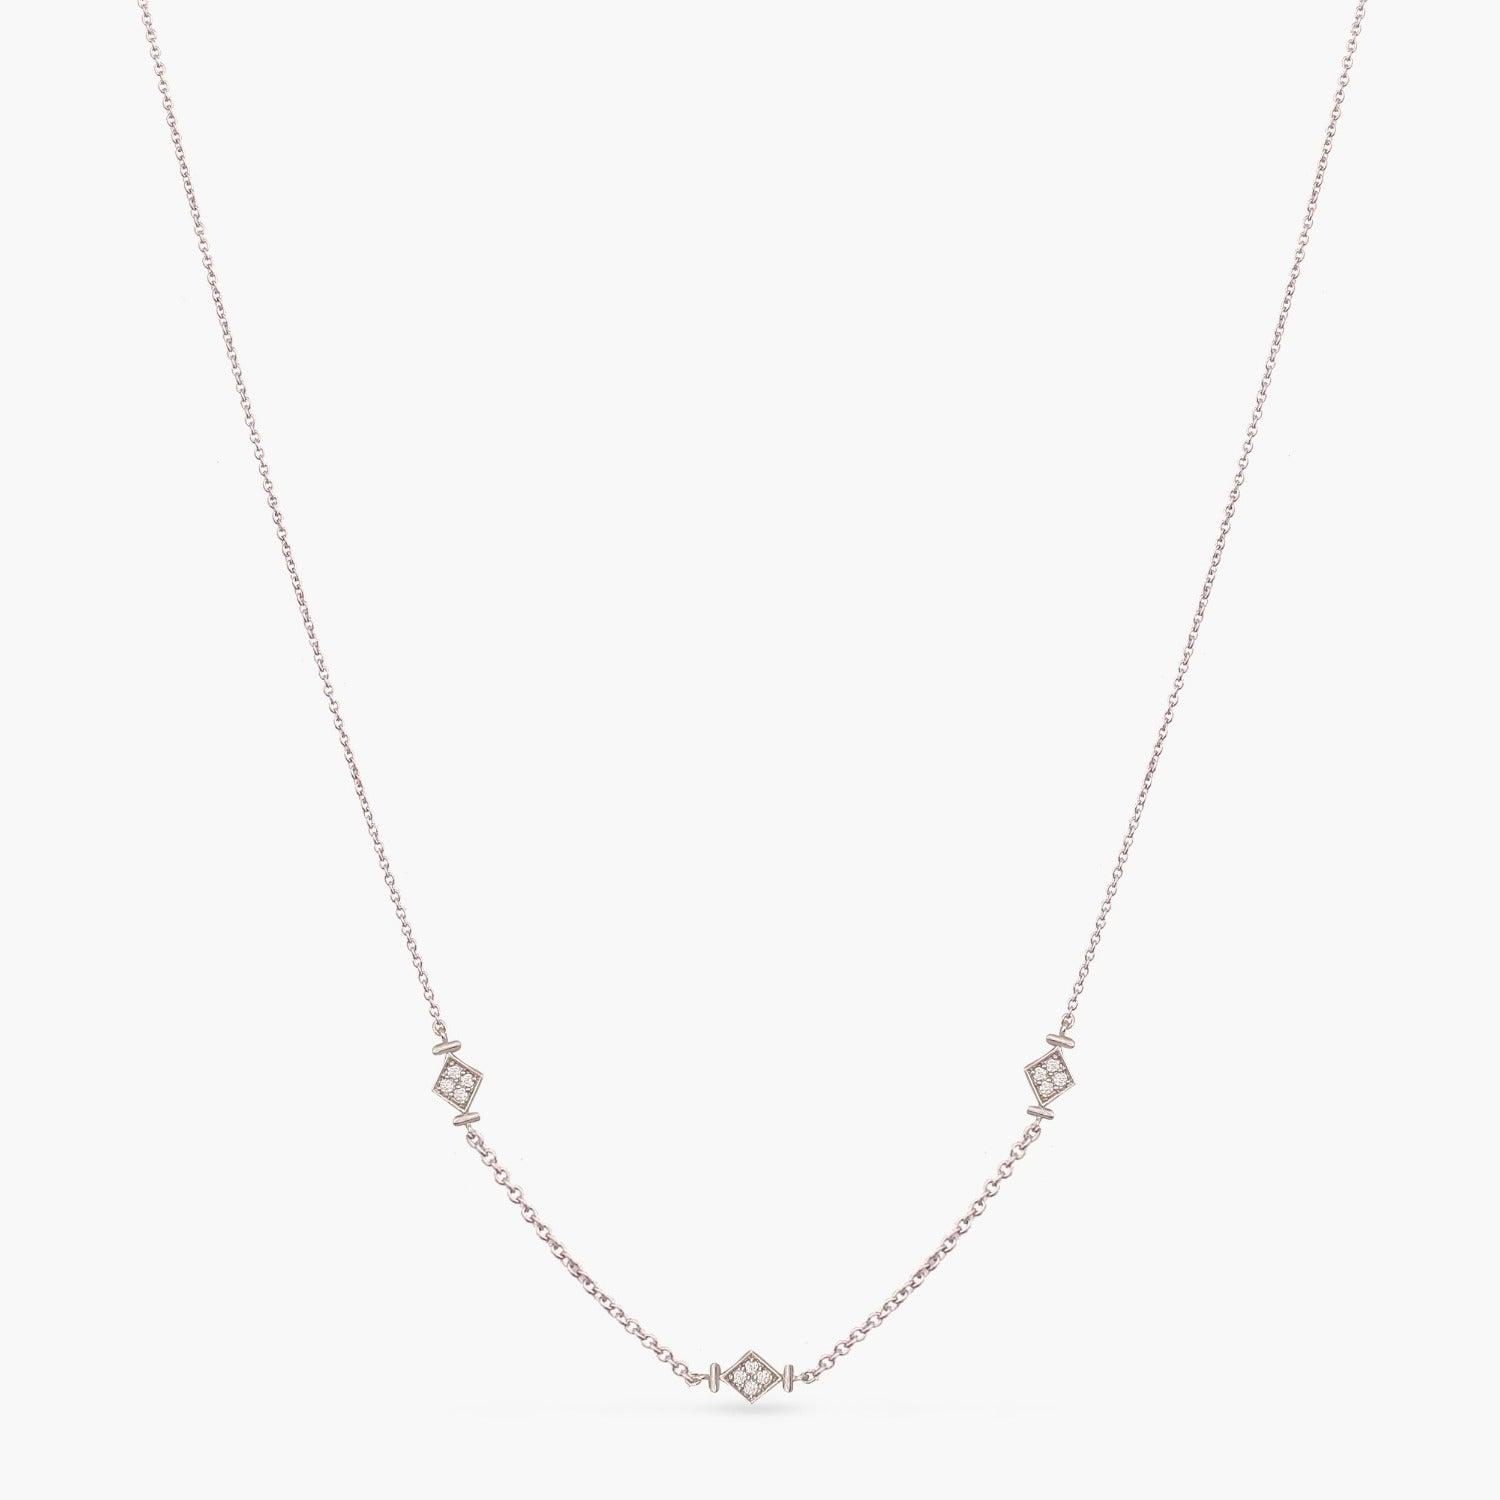 Discover Simple Delicate Silver Necklace